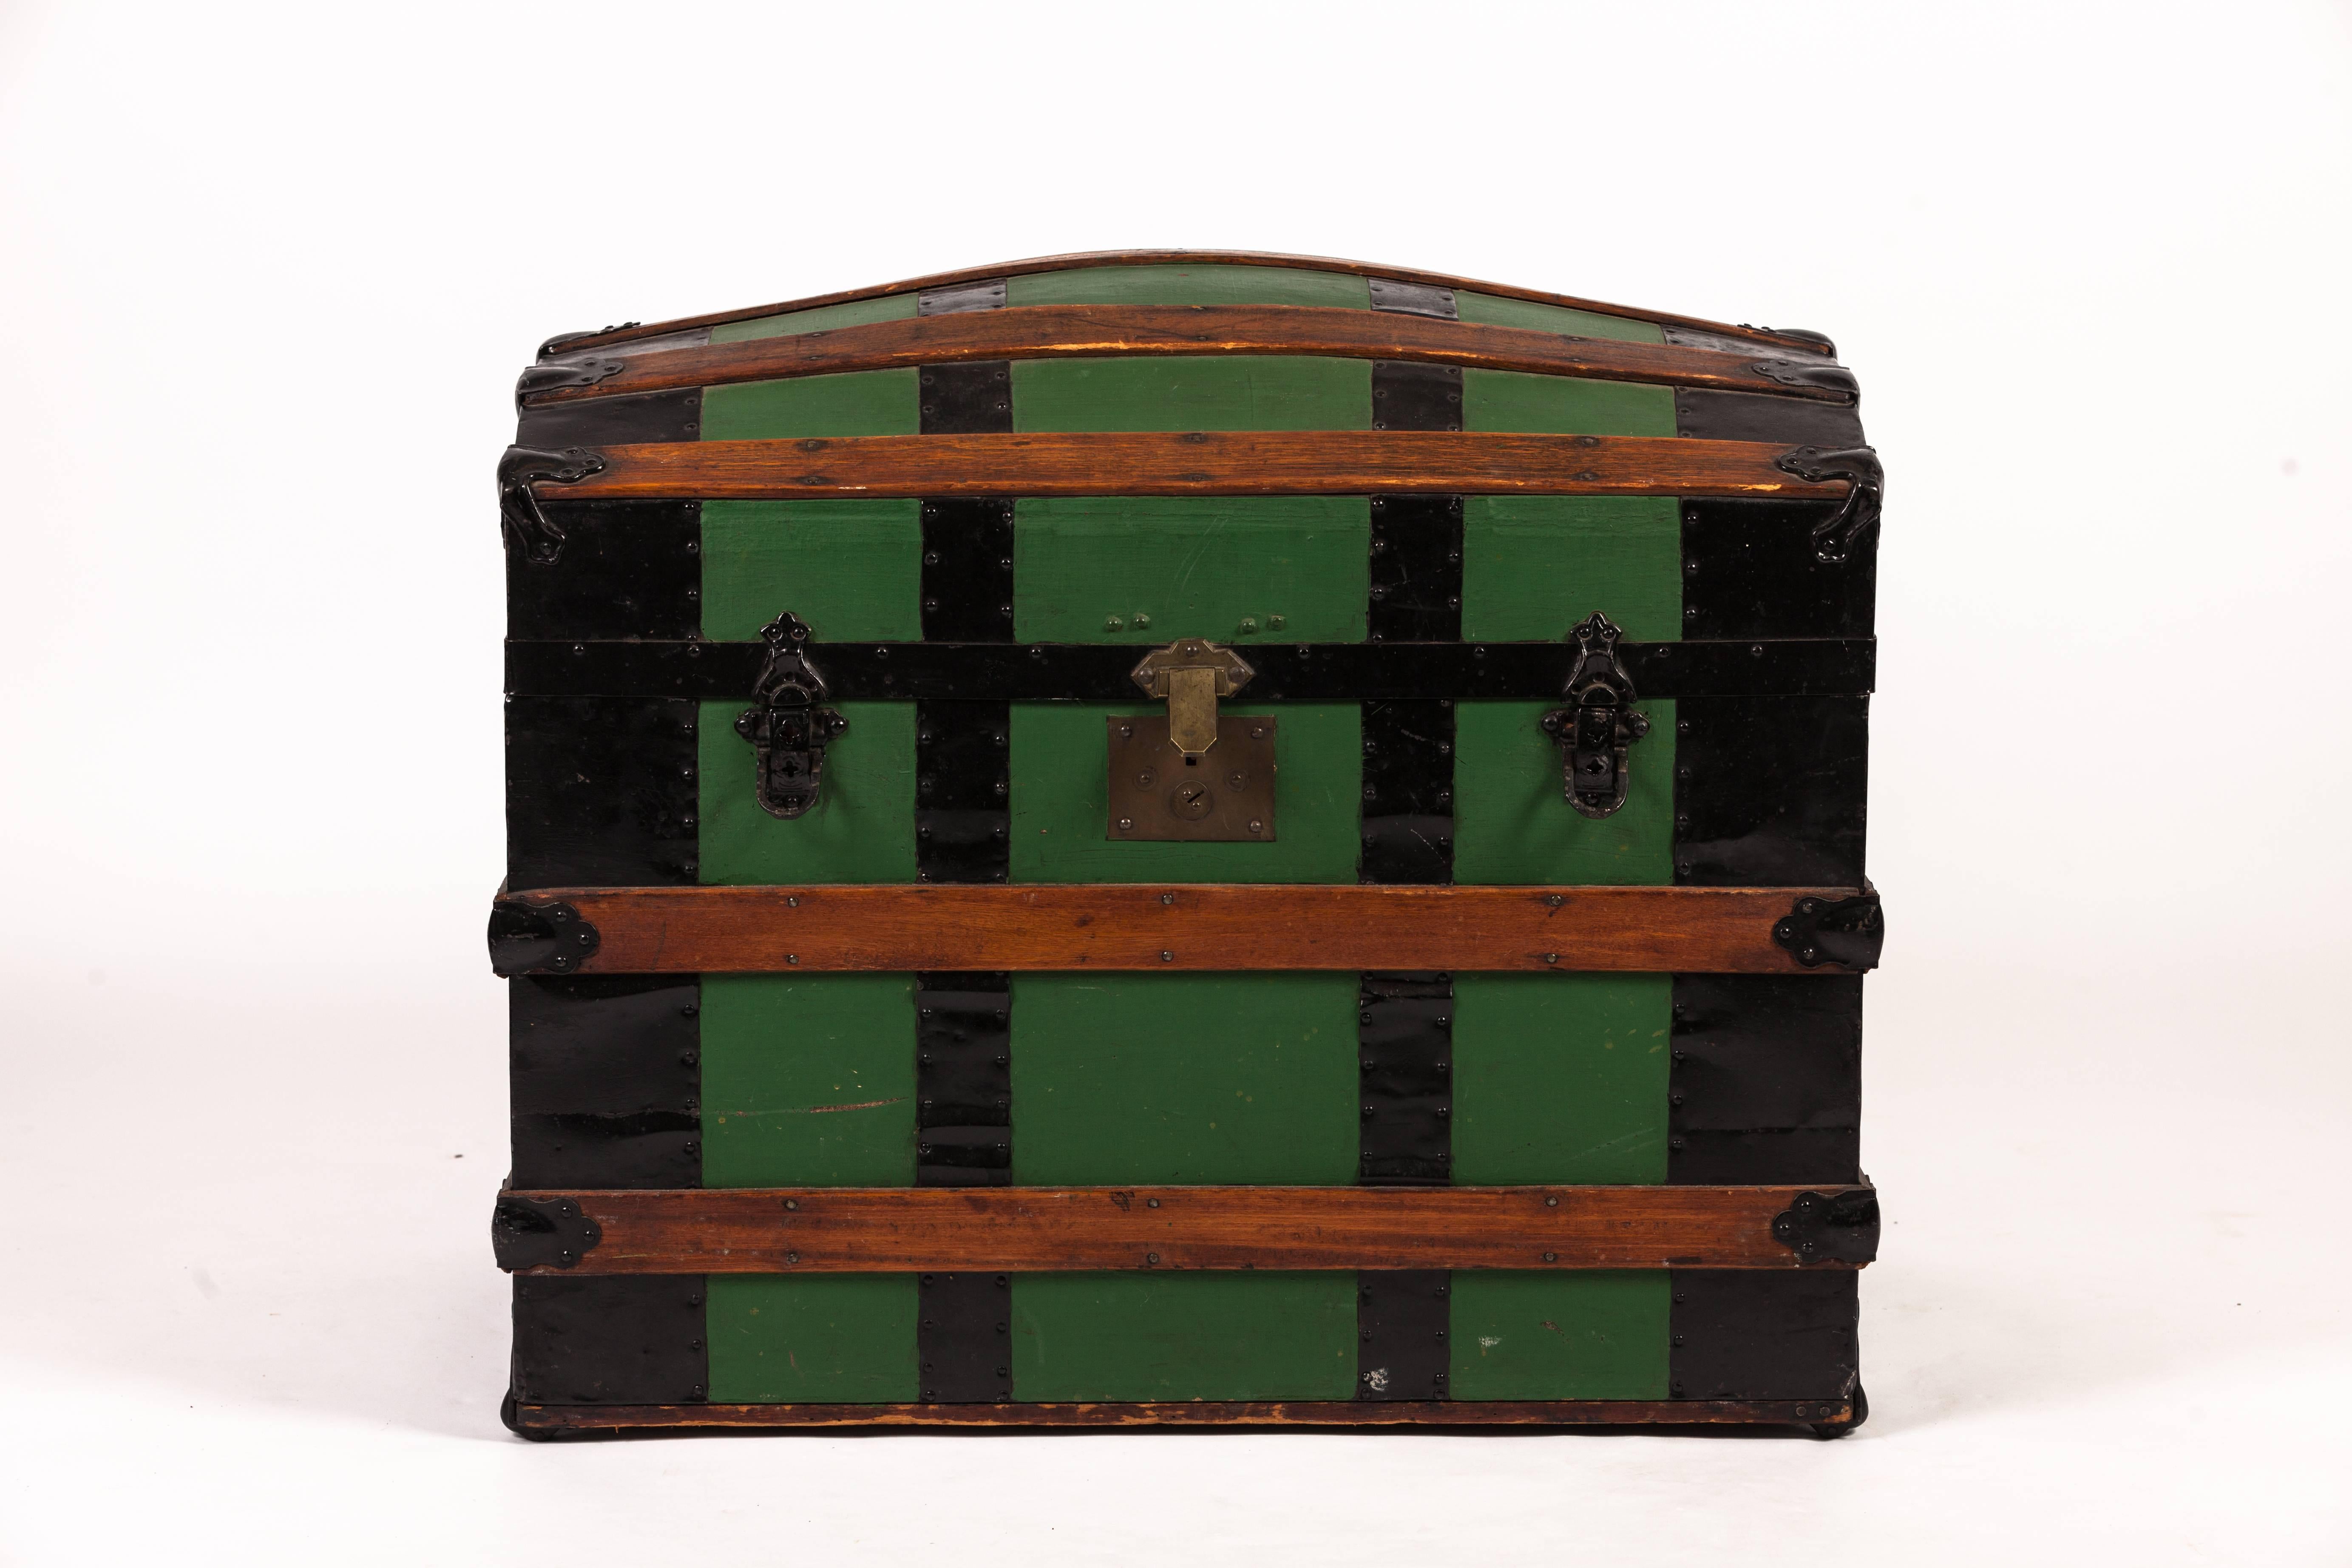 Antique green dome carriage trunk.